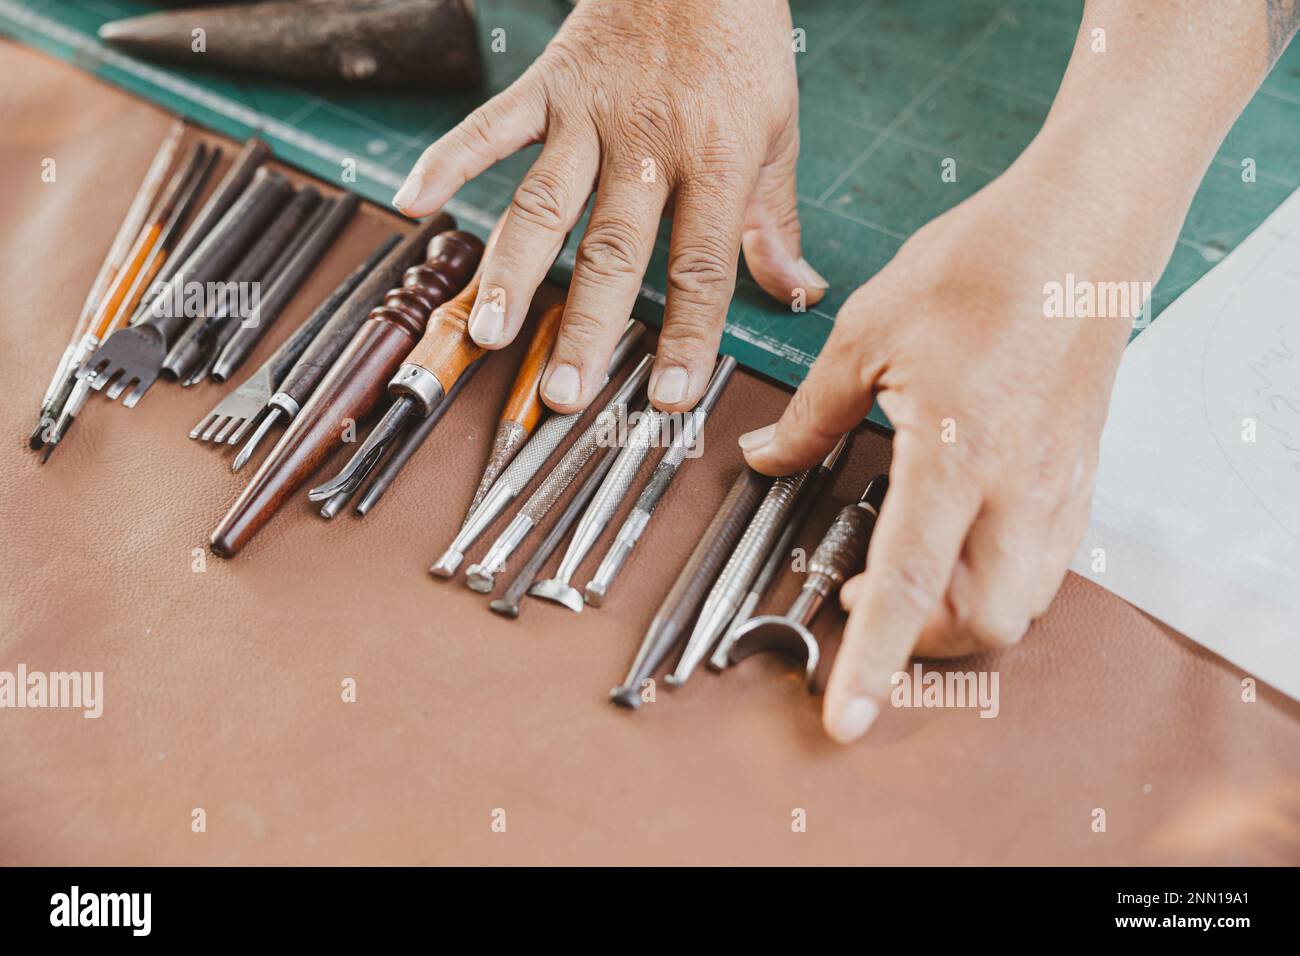 Leather Working Tools And Rolled Up Hide Organized Stock Photo